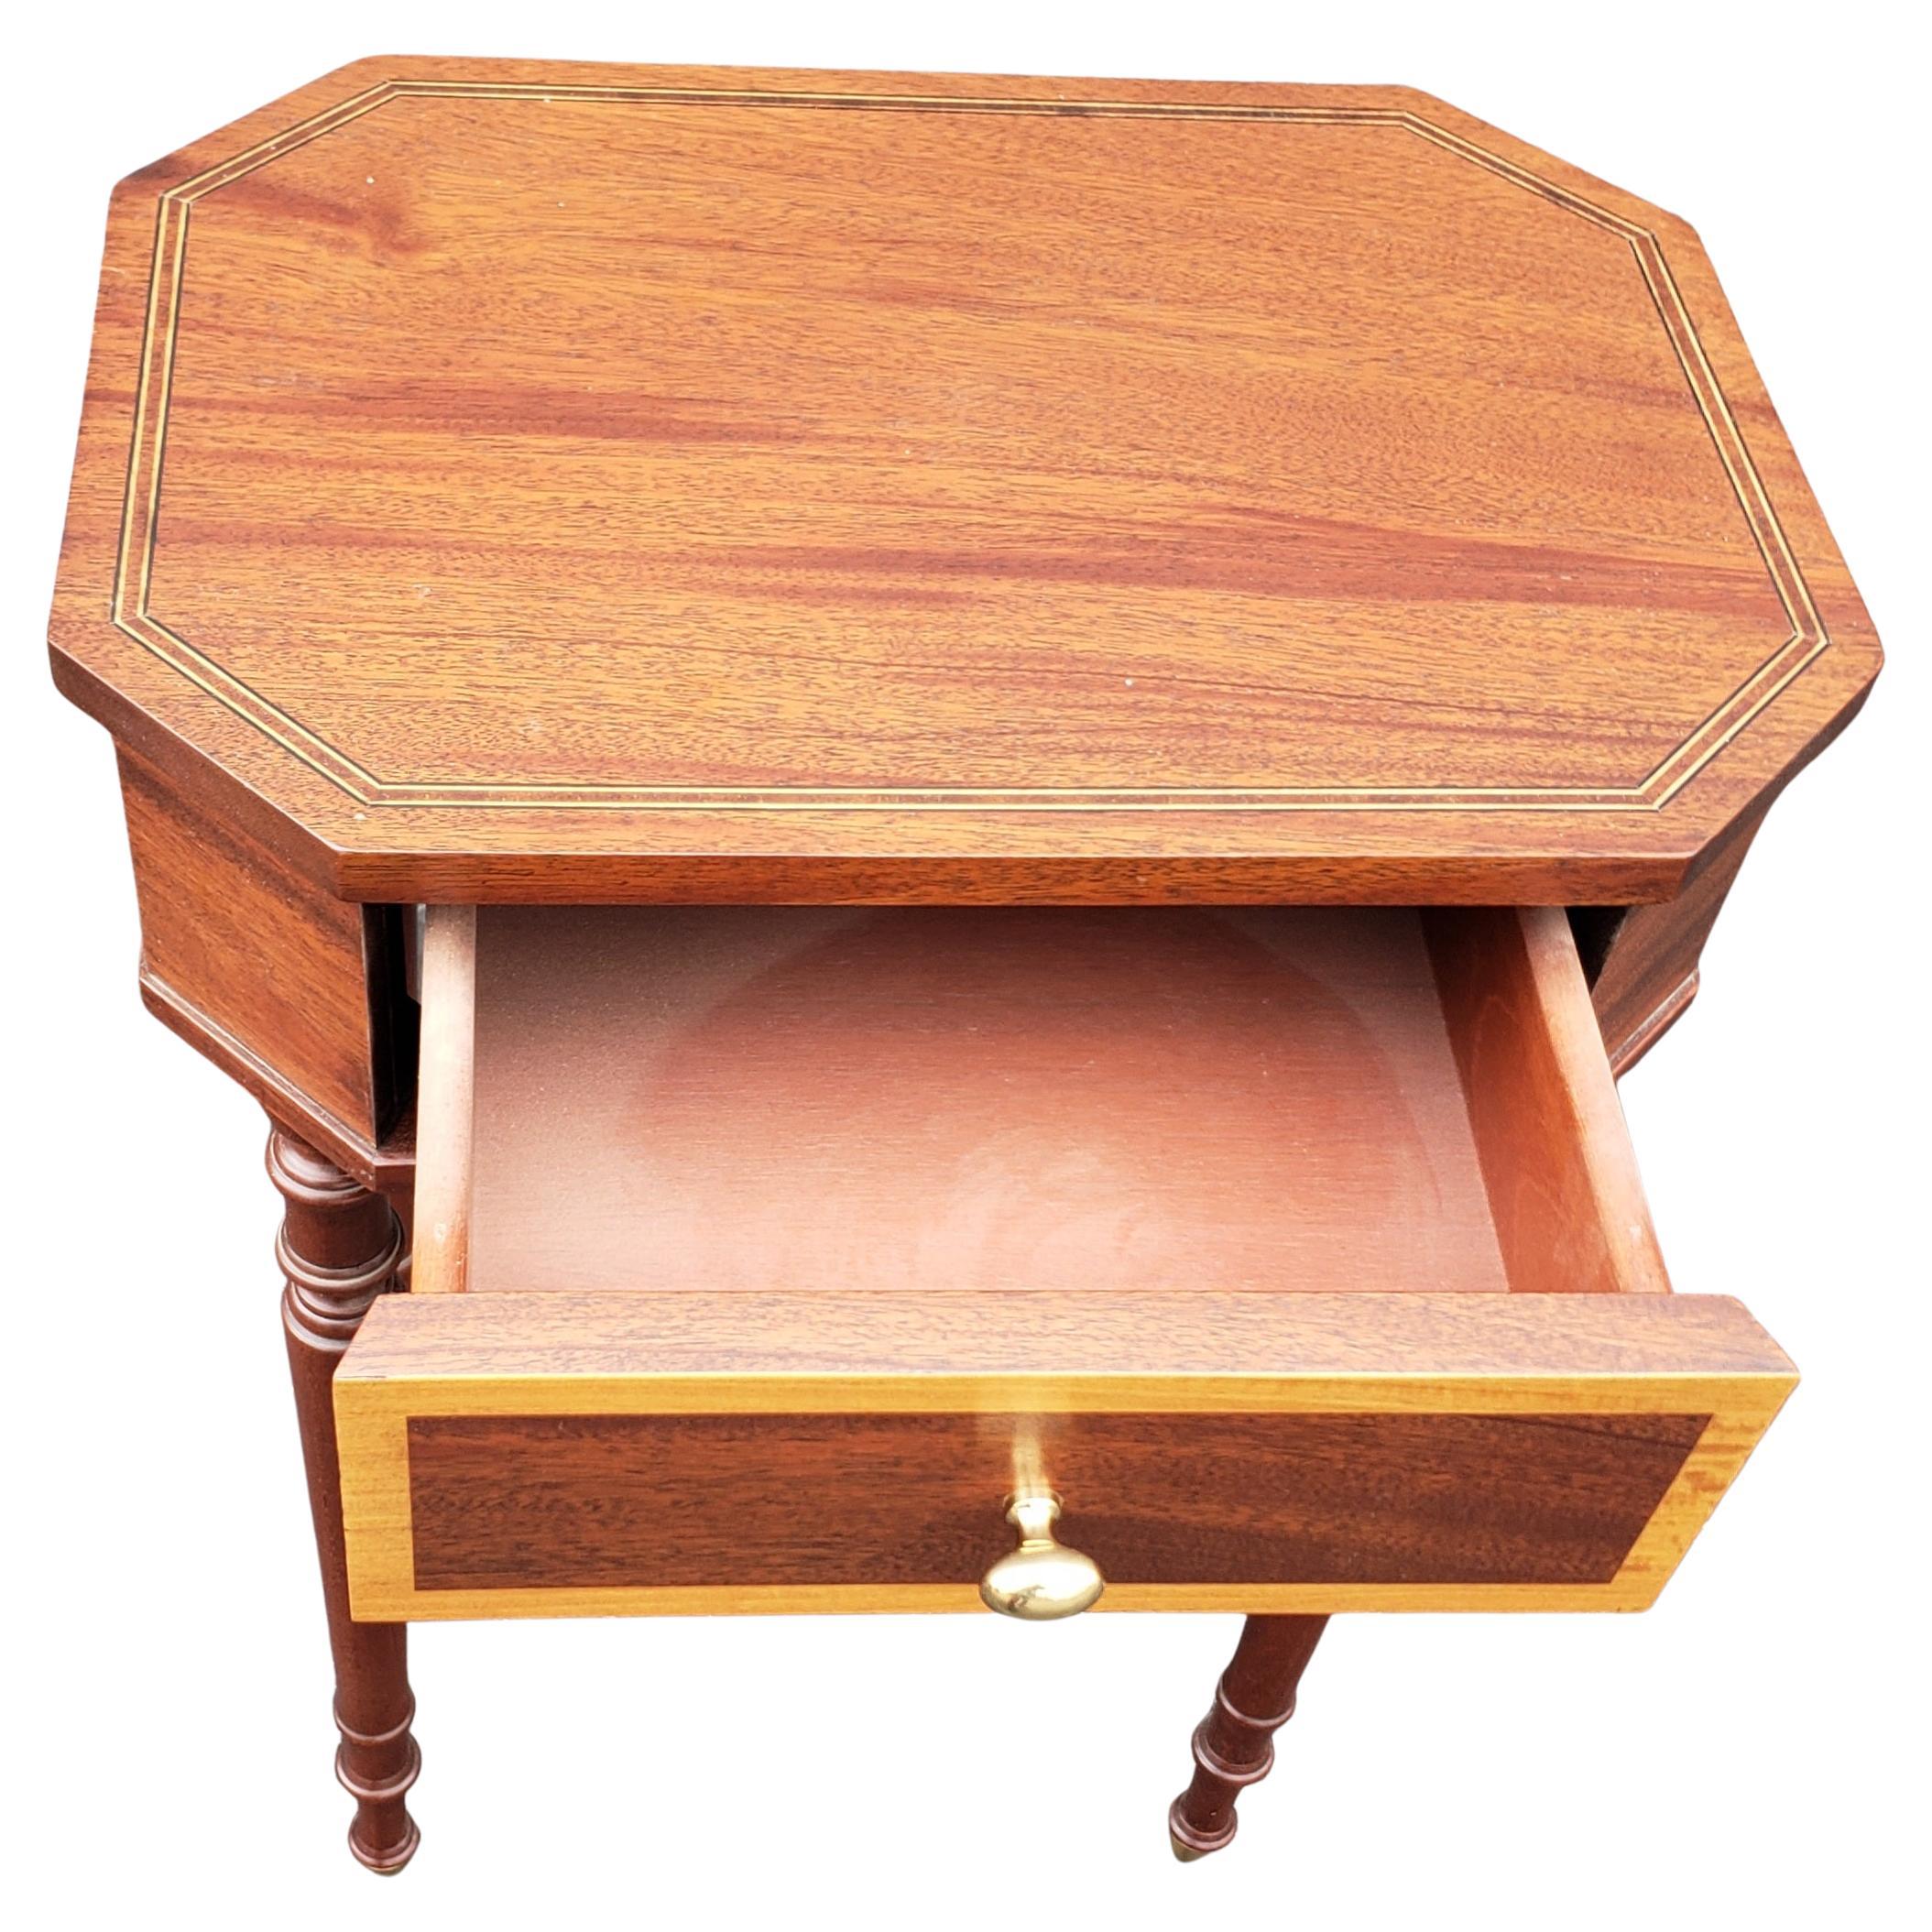 American  Mahogany Satinwood Banded Inlay Inlay Single Drawer Side Table on Wheels For Sale